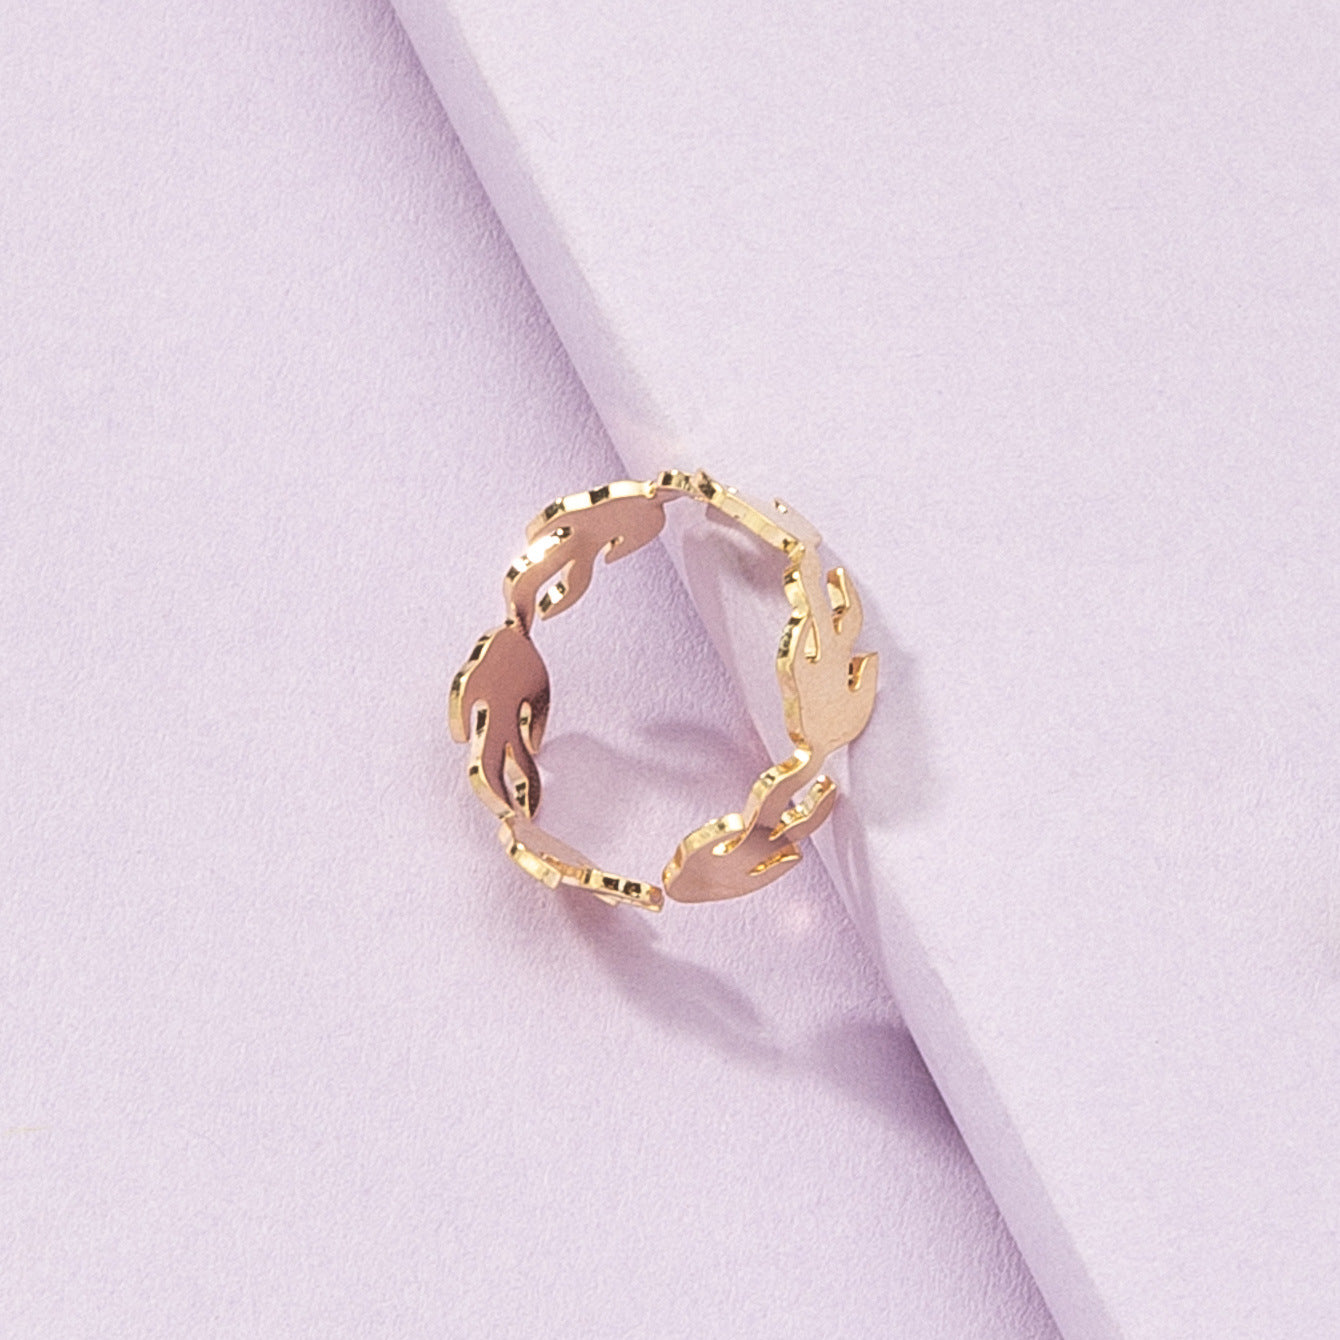 Trendy Summer Jewelry Collection Featuring Unique Fire-Shaped Ring and Instagram-Inspired Bracelet